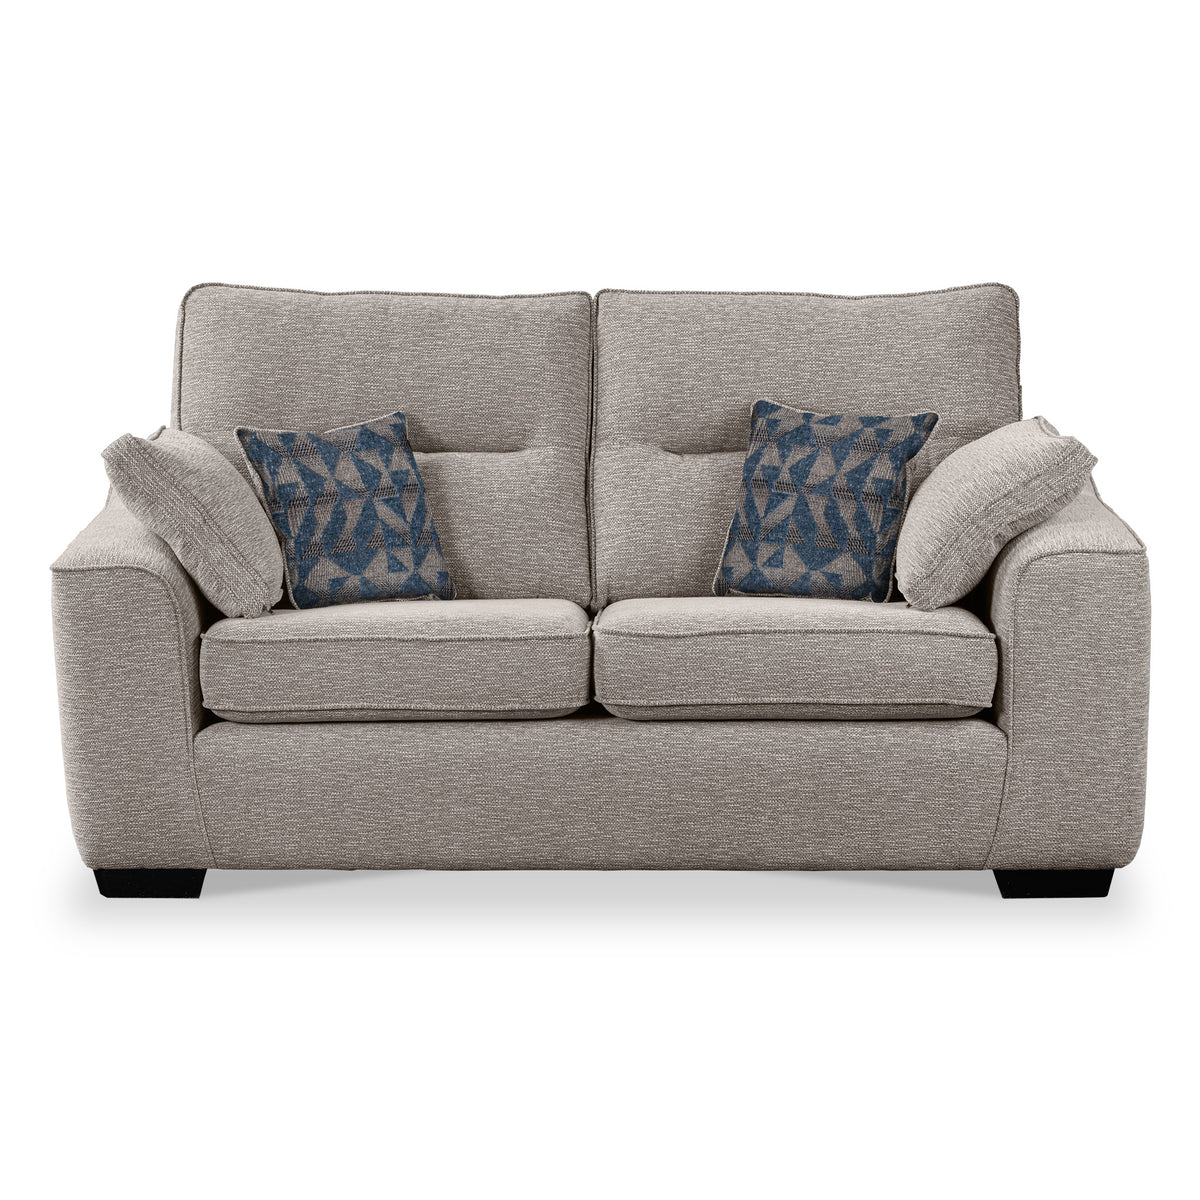 Sudbury Taupe 2 Seater Sofabed with Aegean Scatter Cushions from Roseland Furniture